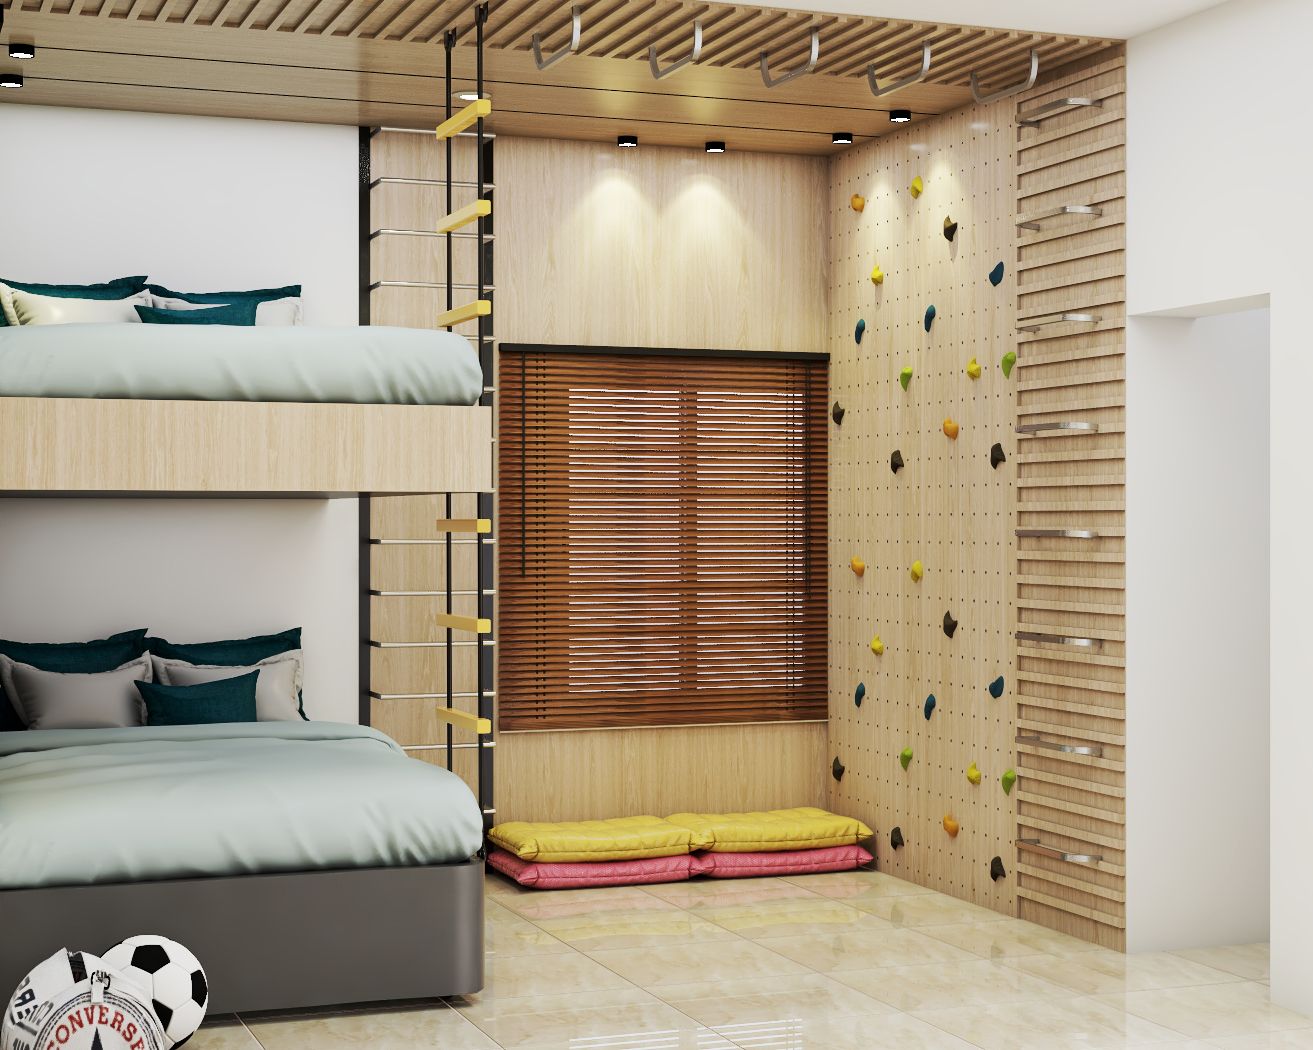 Contemporary Wall Climbing Wall Design With Wooden Panelling And Colourful Handholds